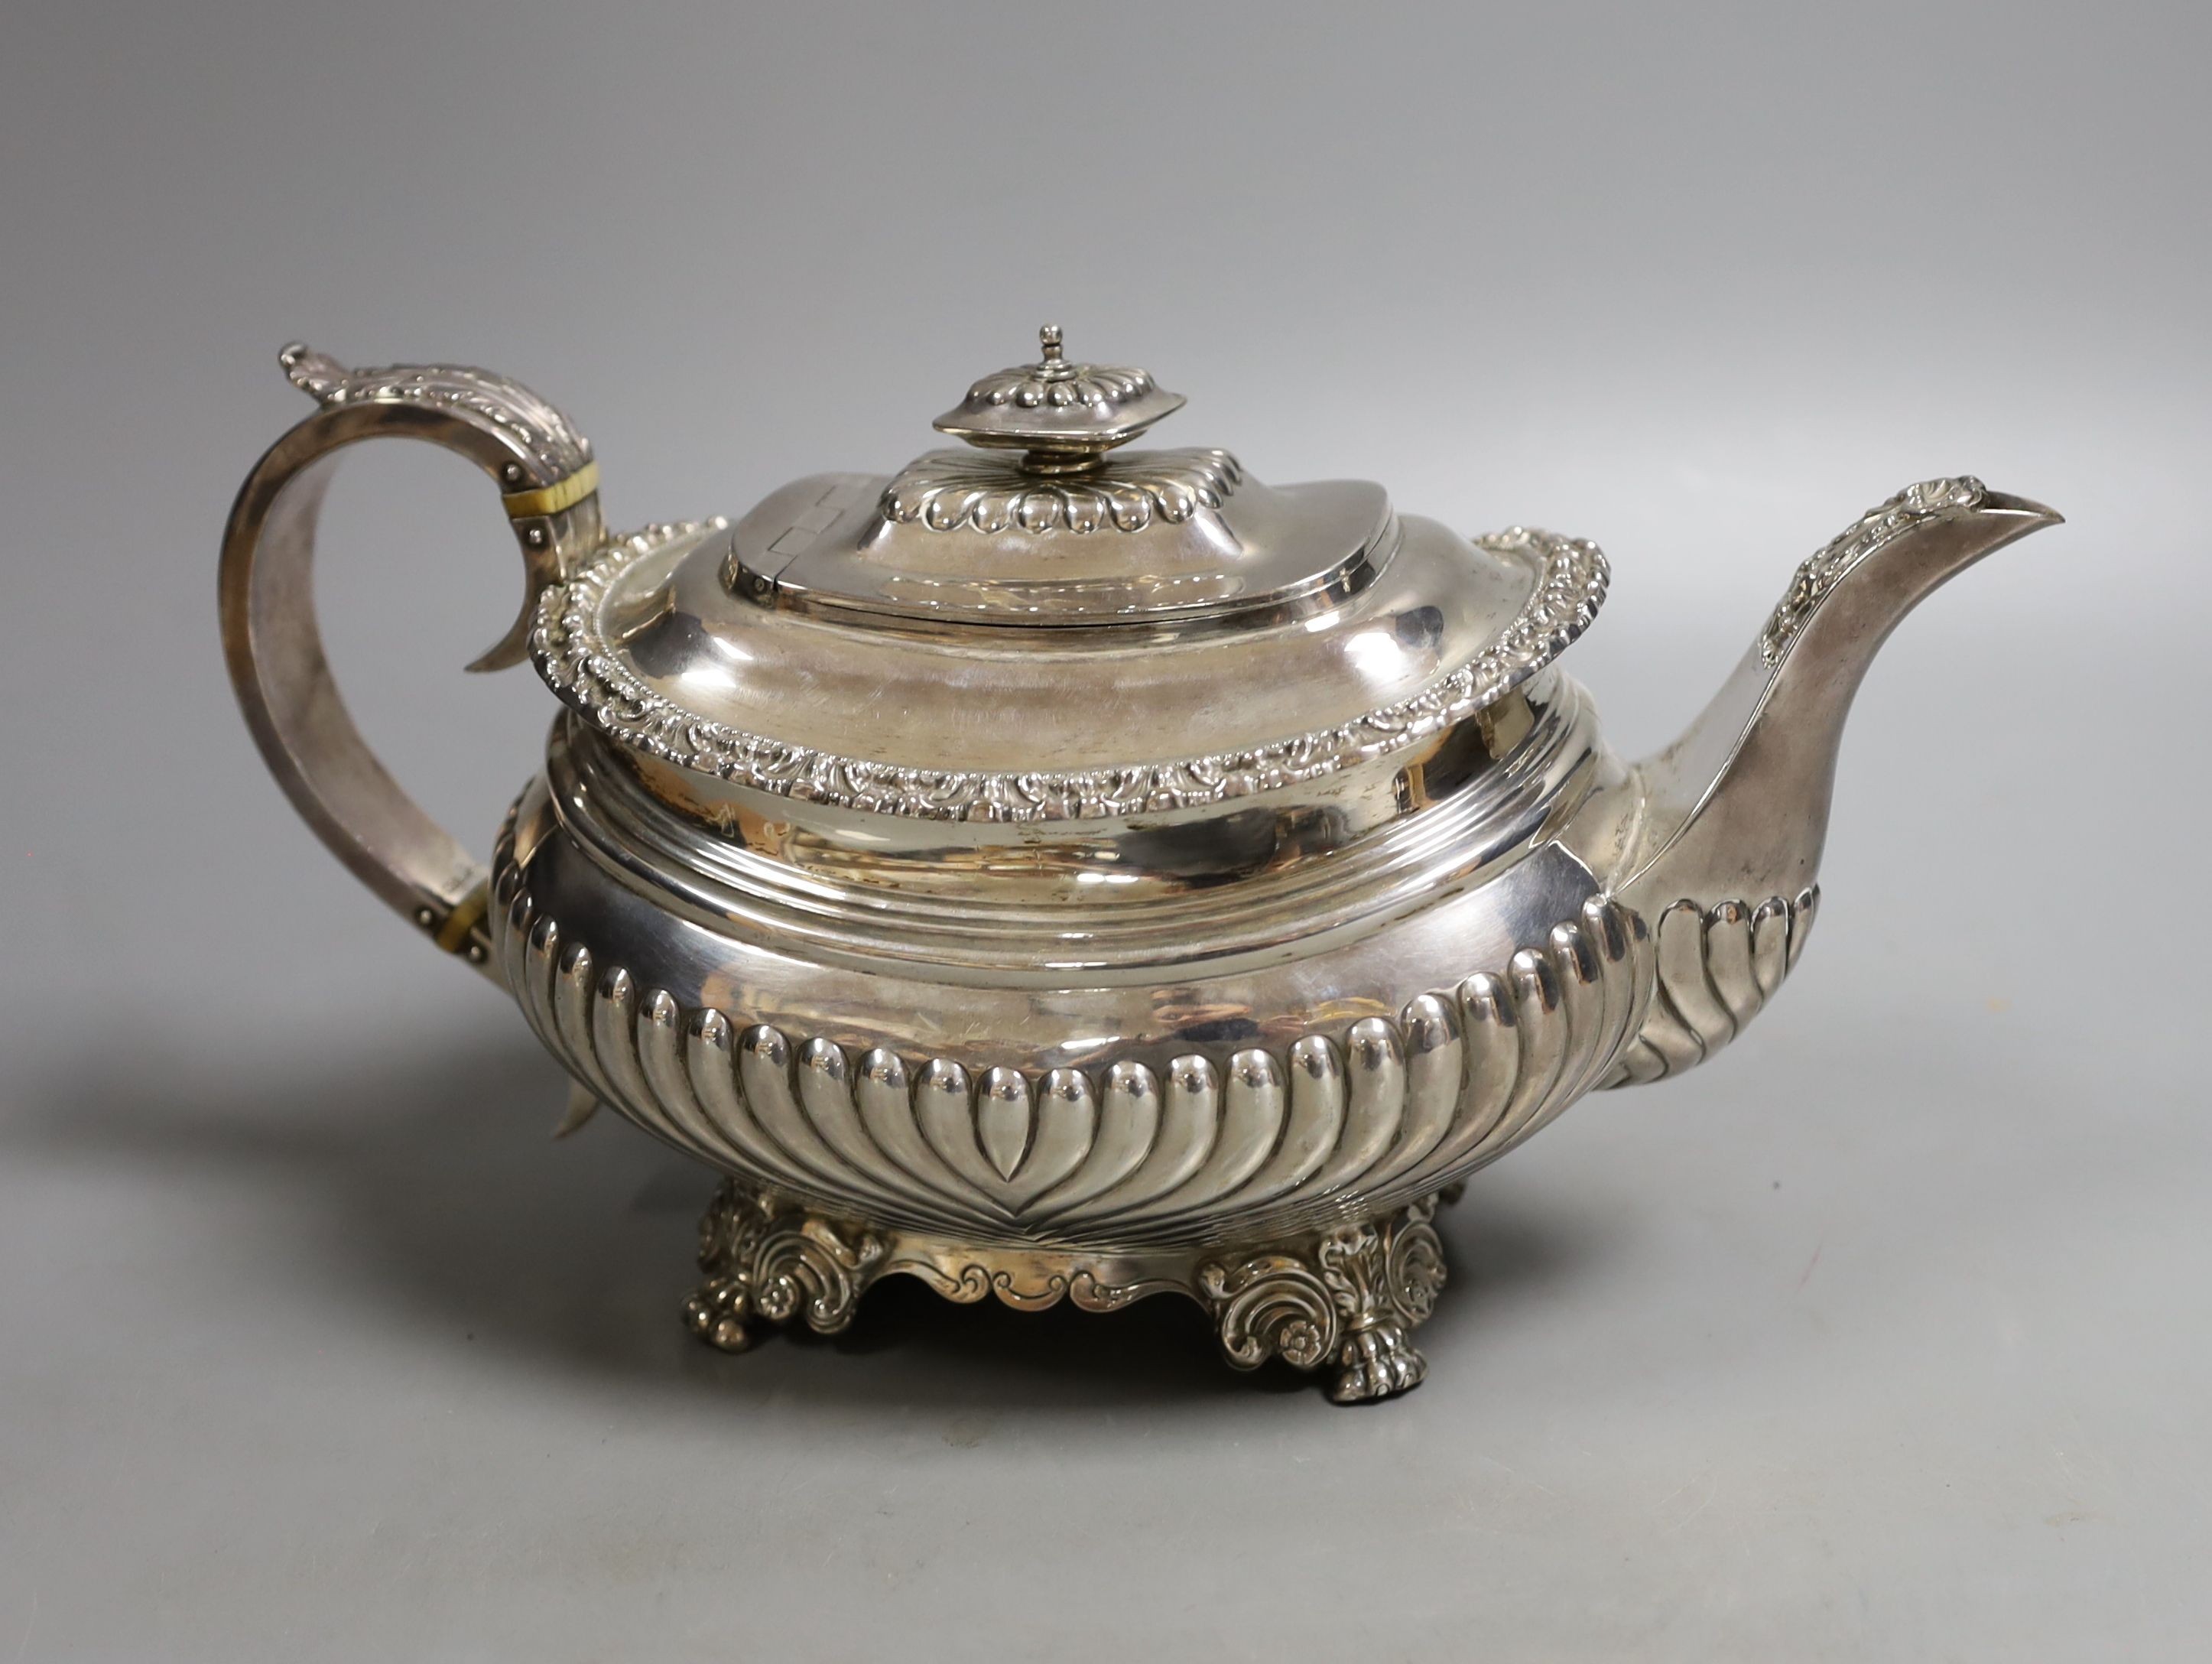 A George IV demi-fluted silver teapot, by John & Thomas Settle, Sheffield, 1824, gross weight 23.5oz (patch to base).